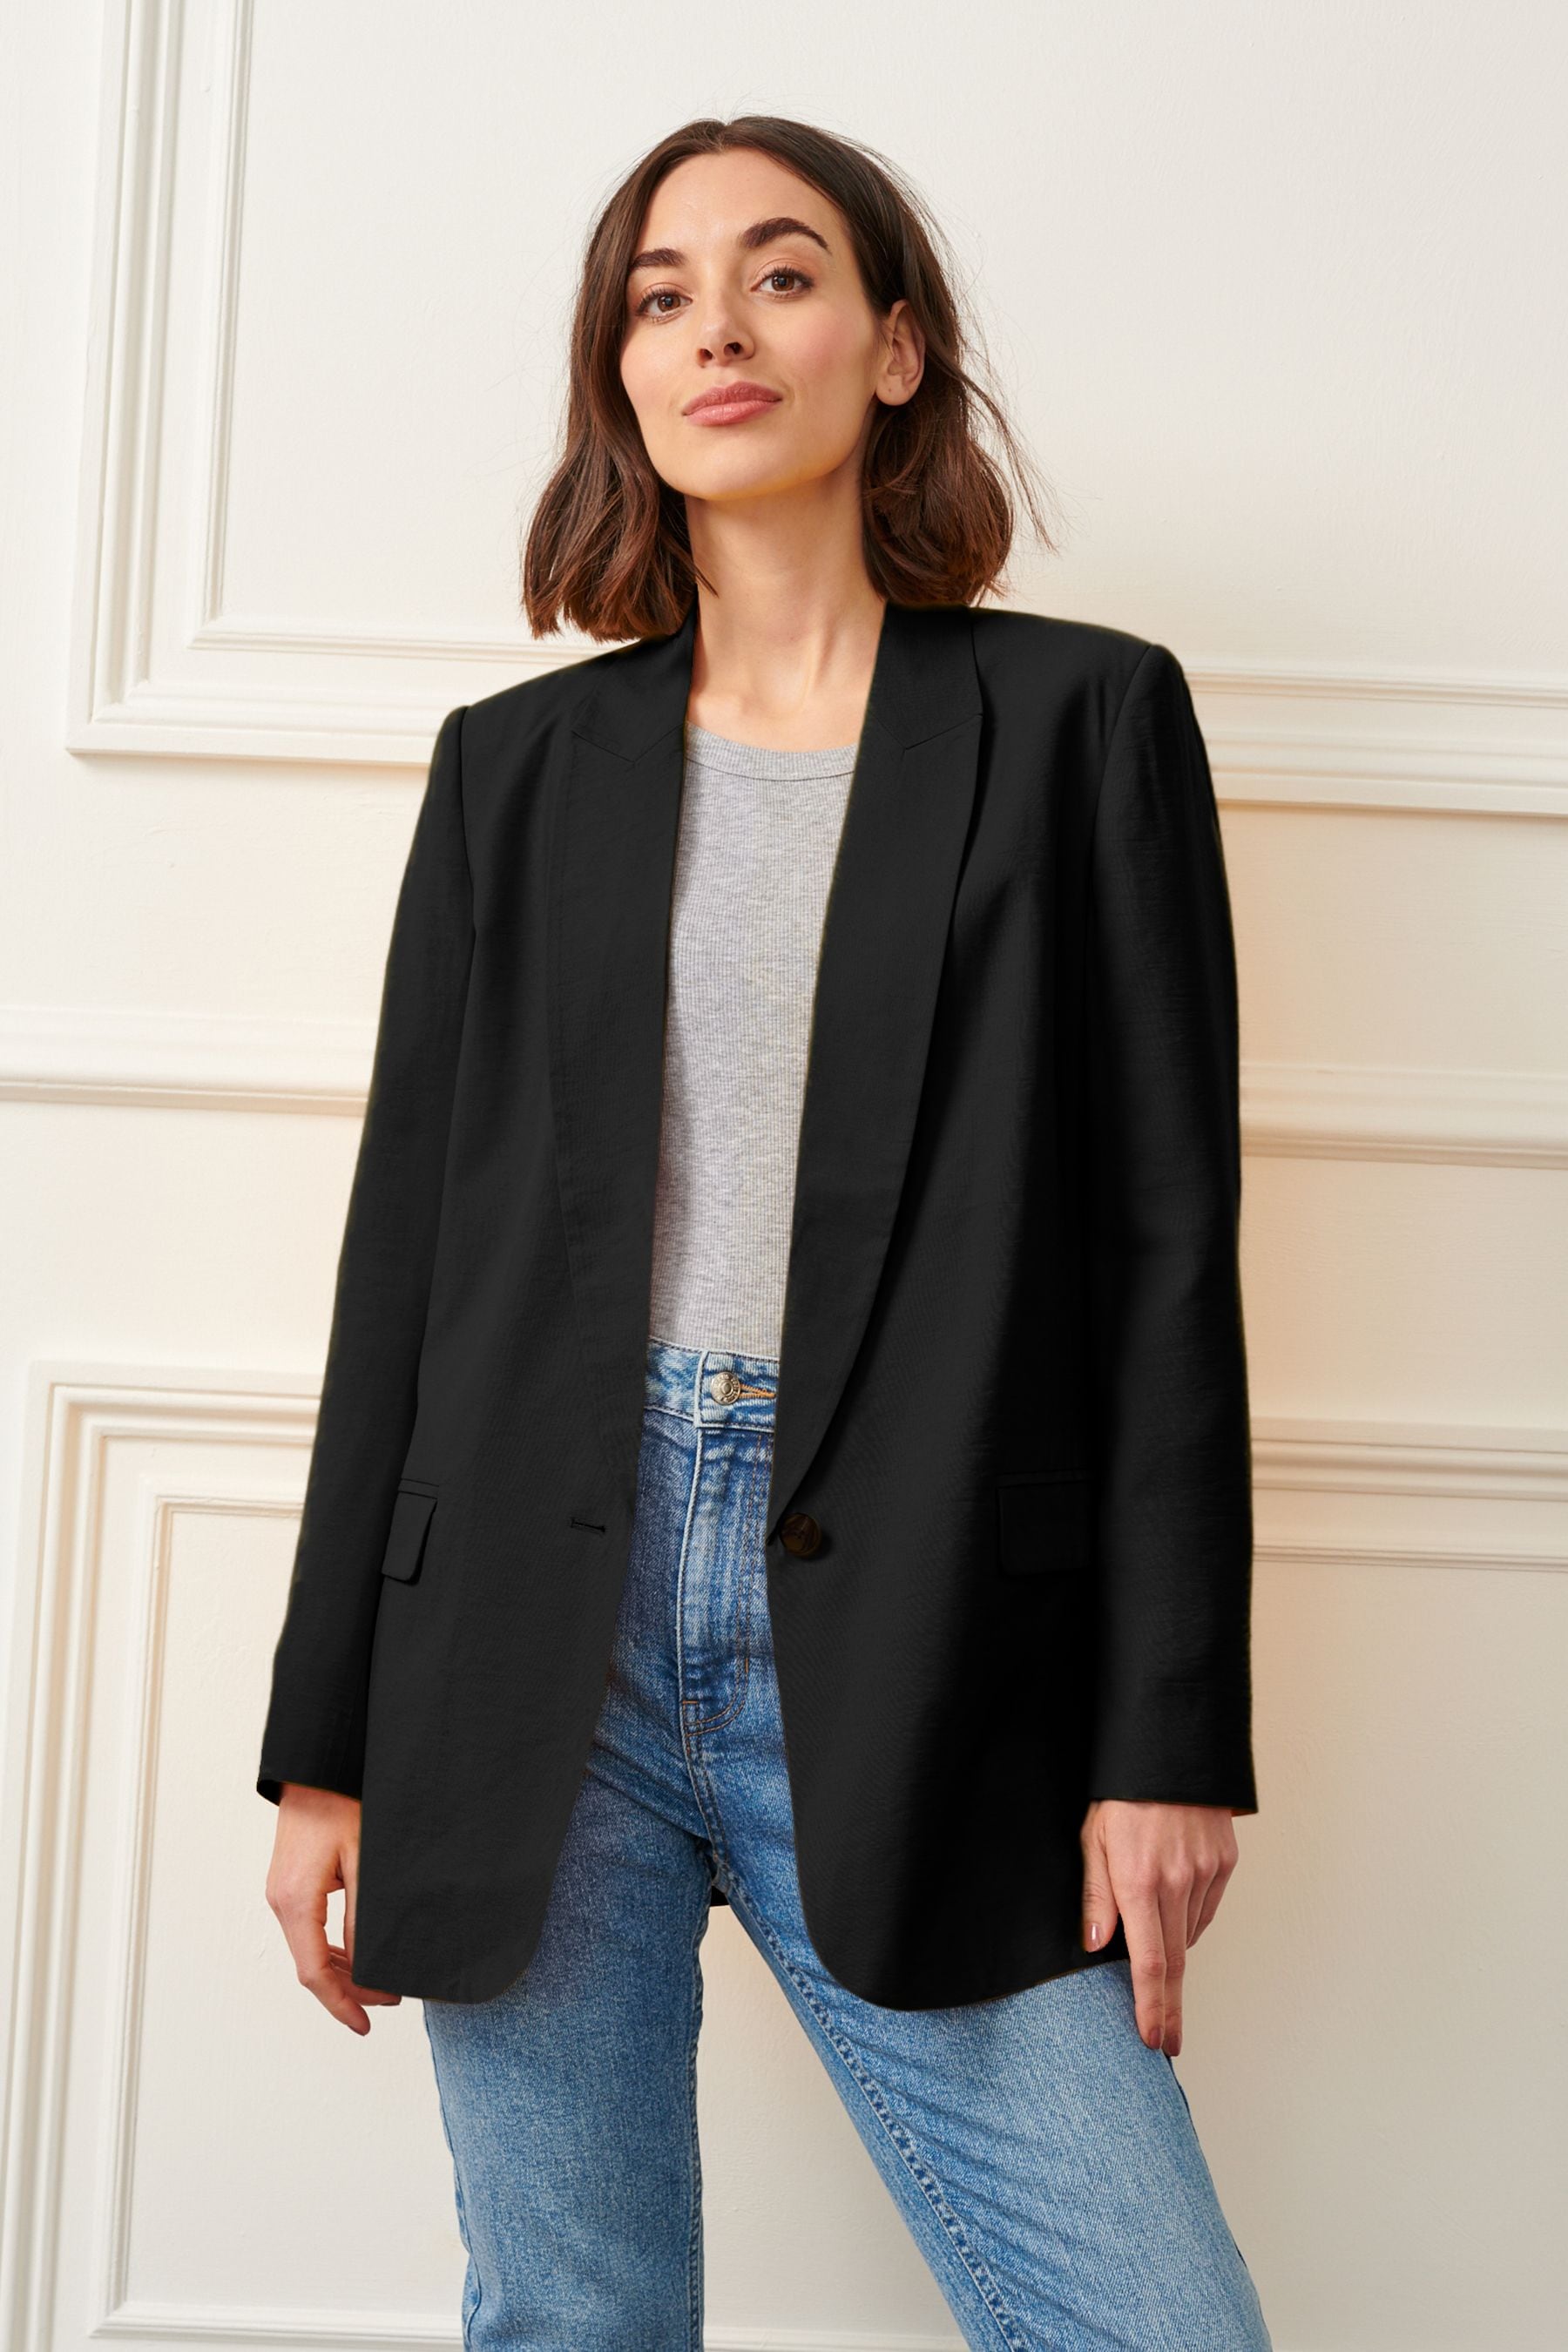 Buy Black Relaxed Fit Single Breasted Blazer from the Next UK online shop